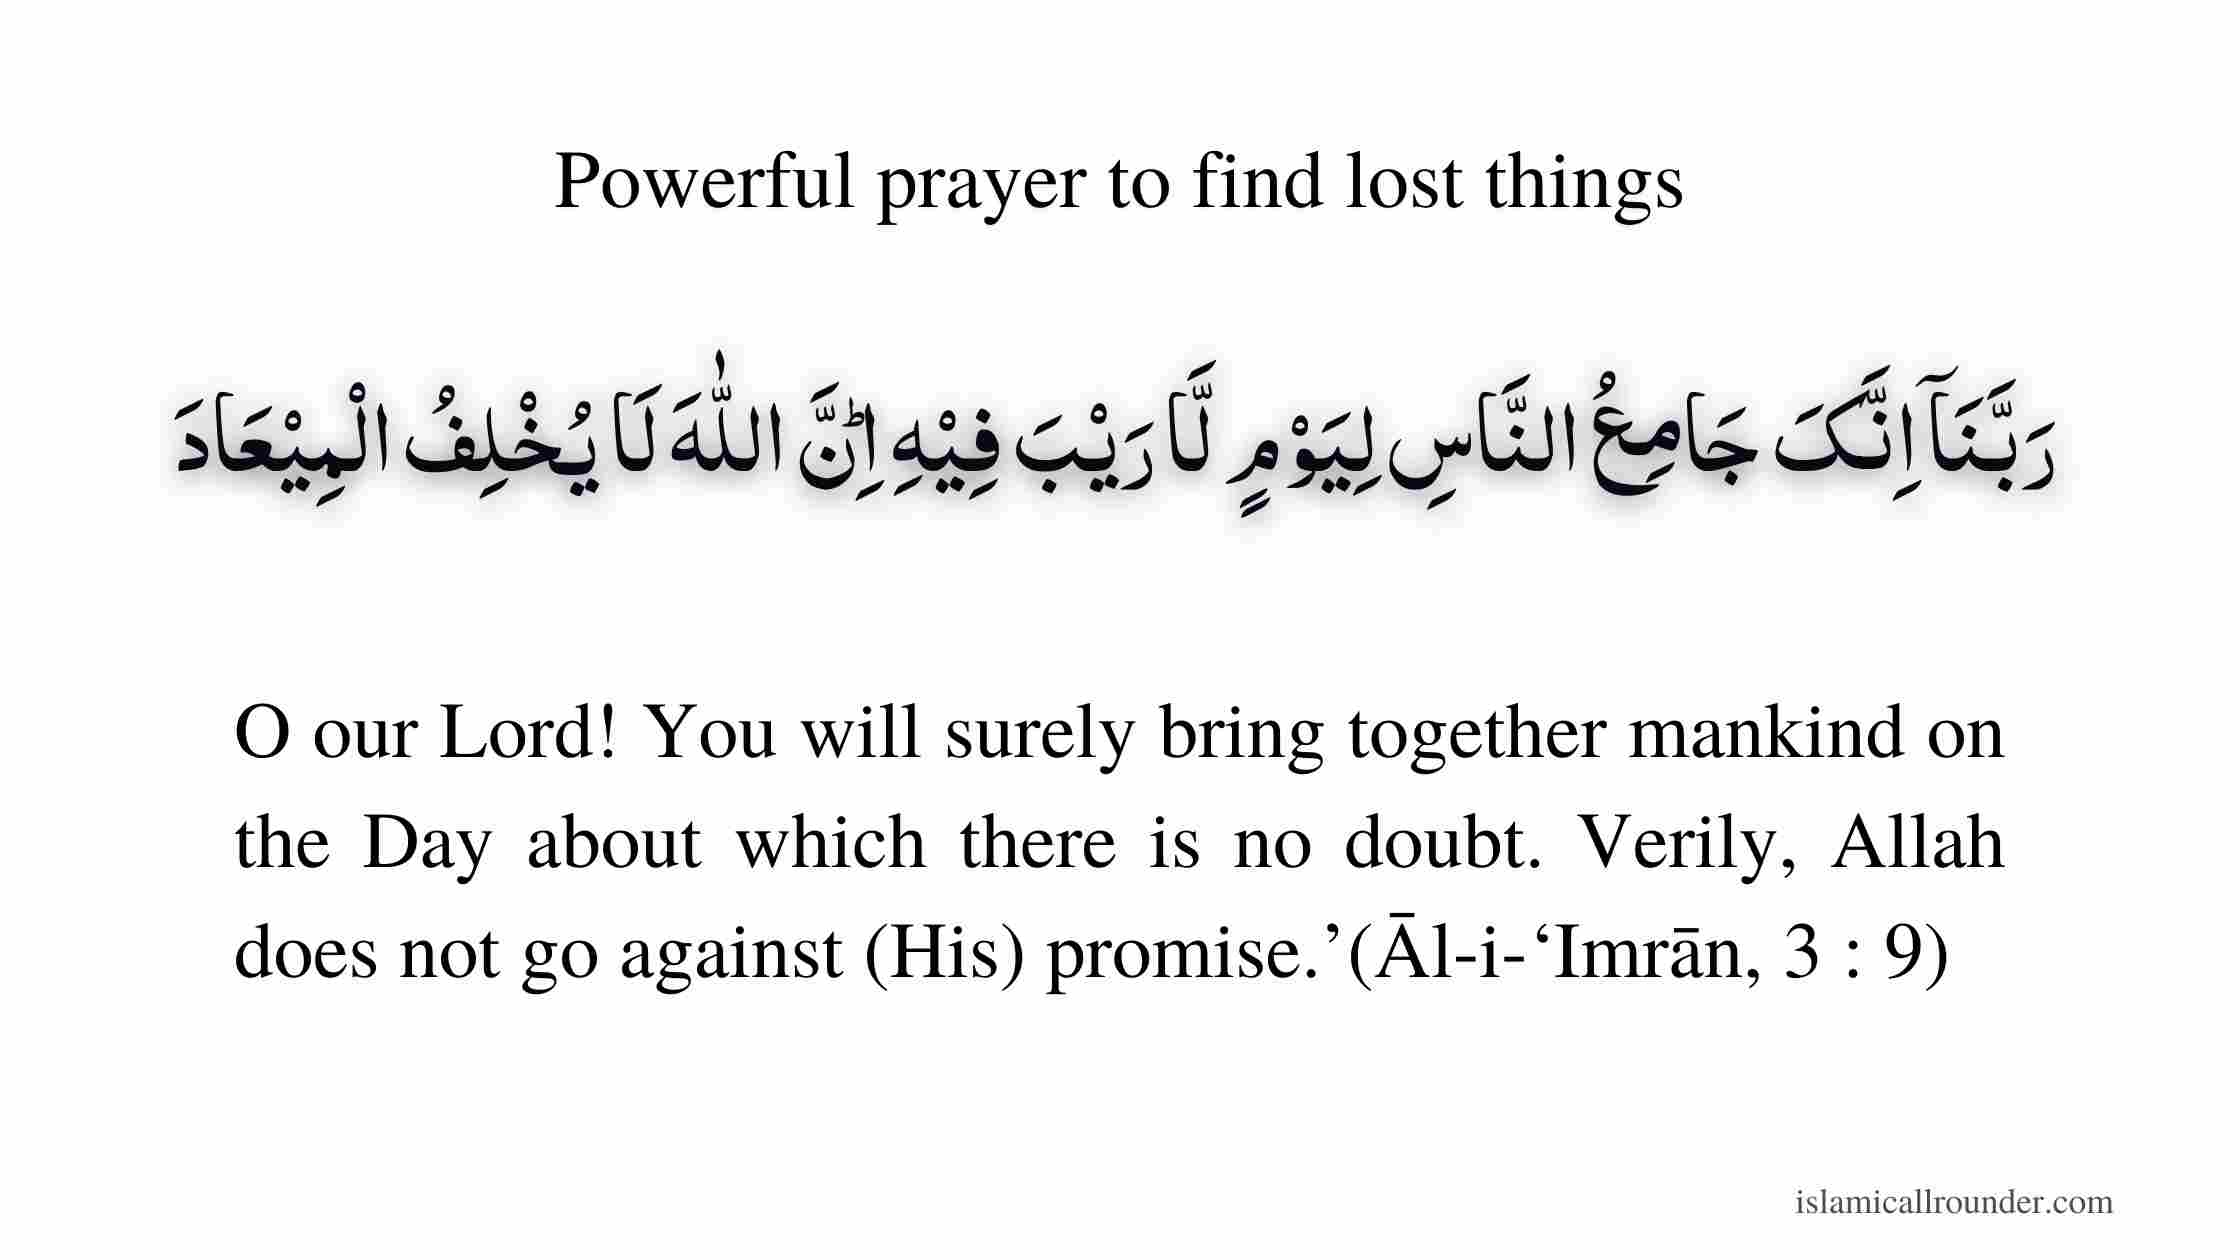 Powerful prayer to find lost things